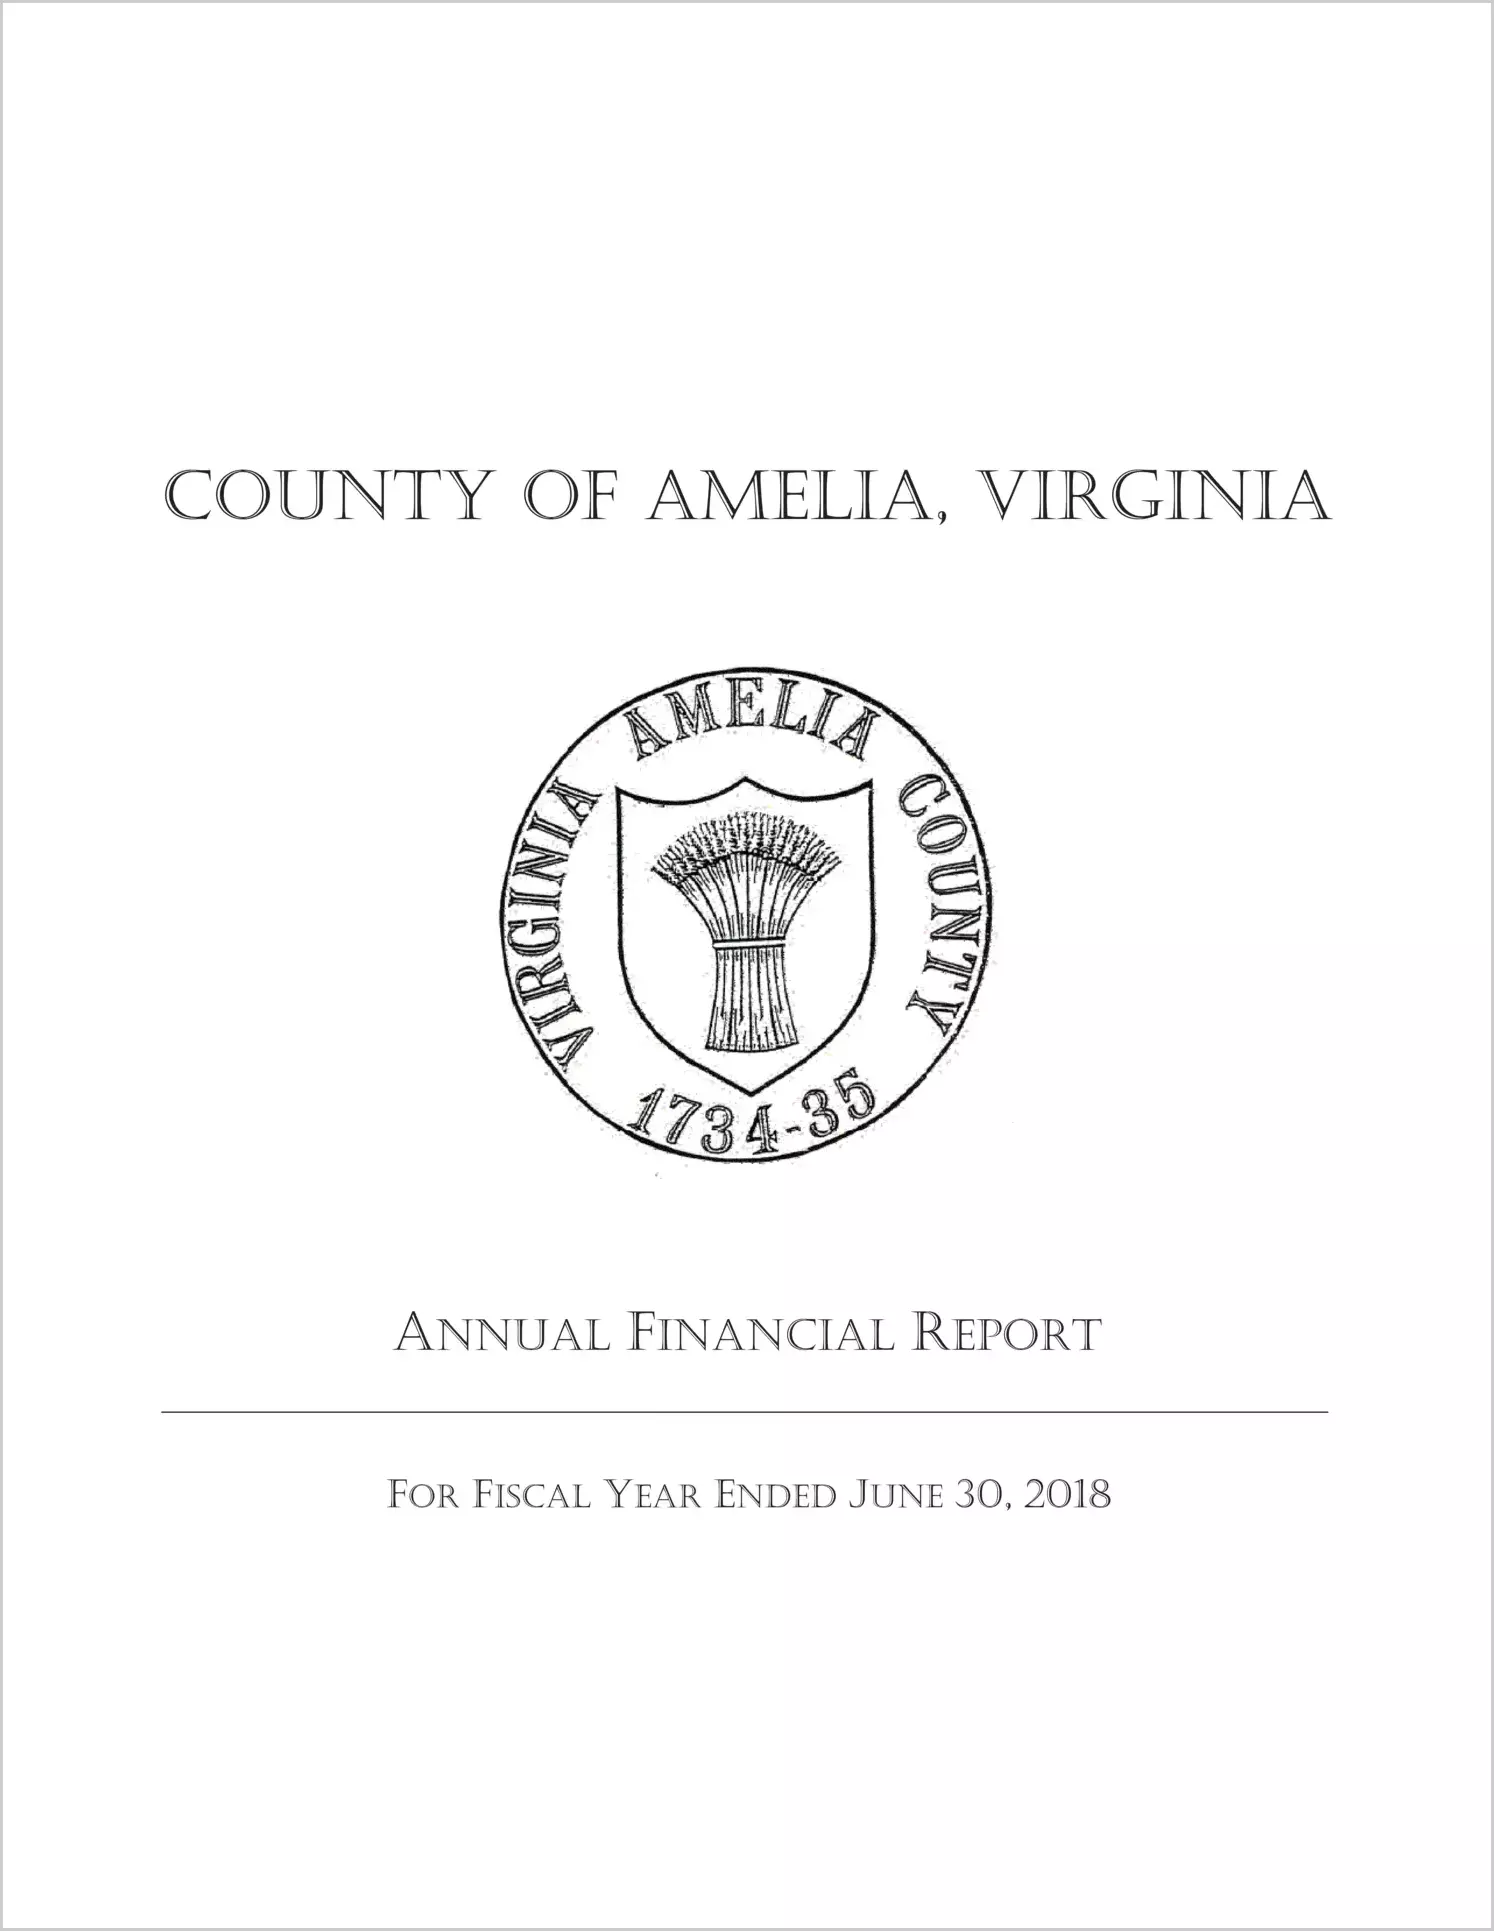 2018 Annual Financial Report for County of Amelia